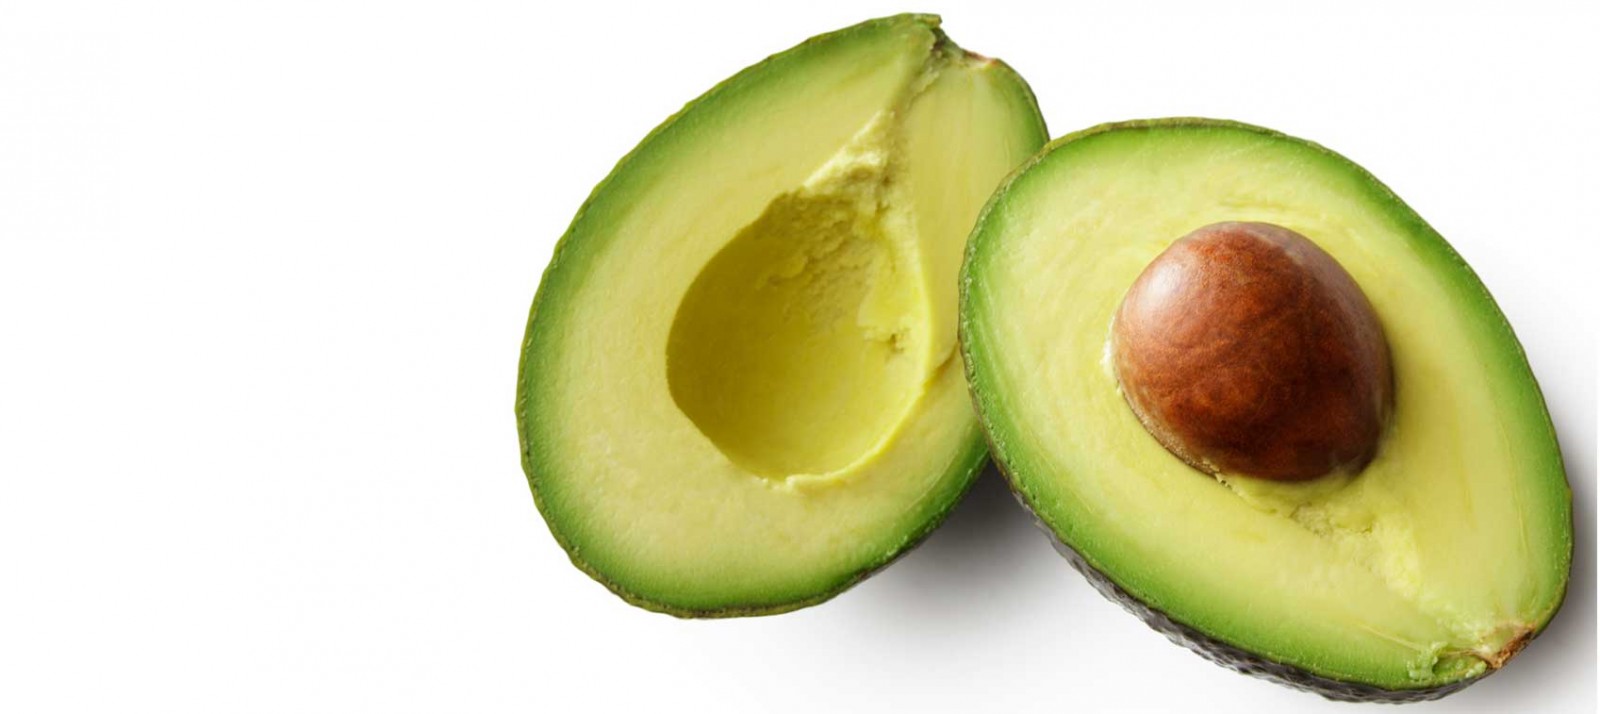 Avocado is just one of its ingredients providing health benefits